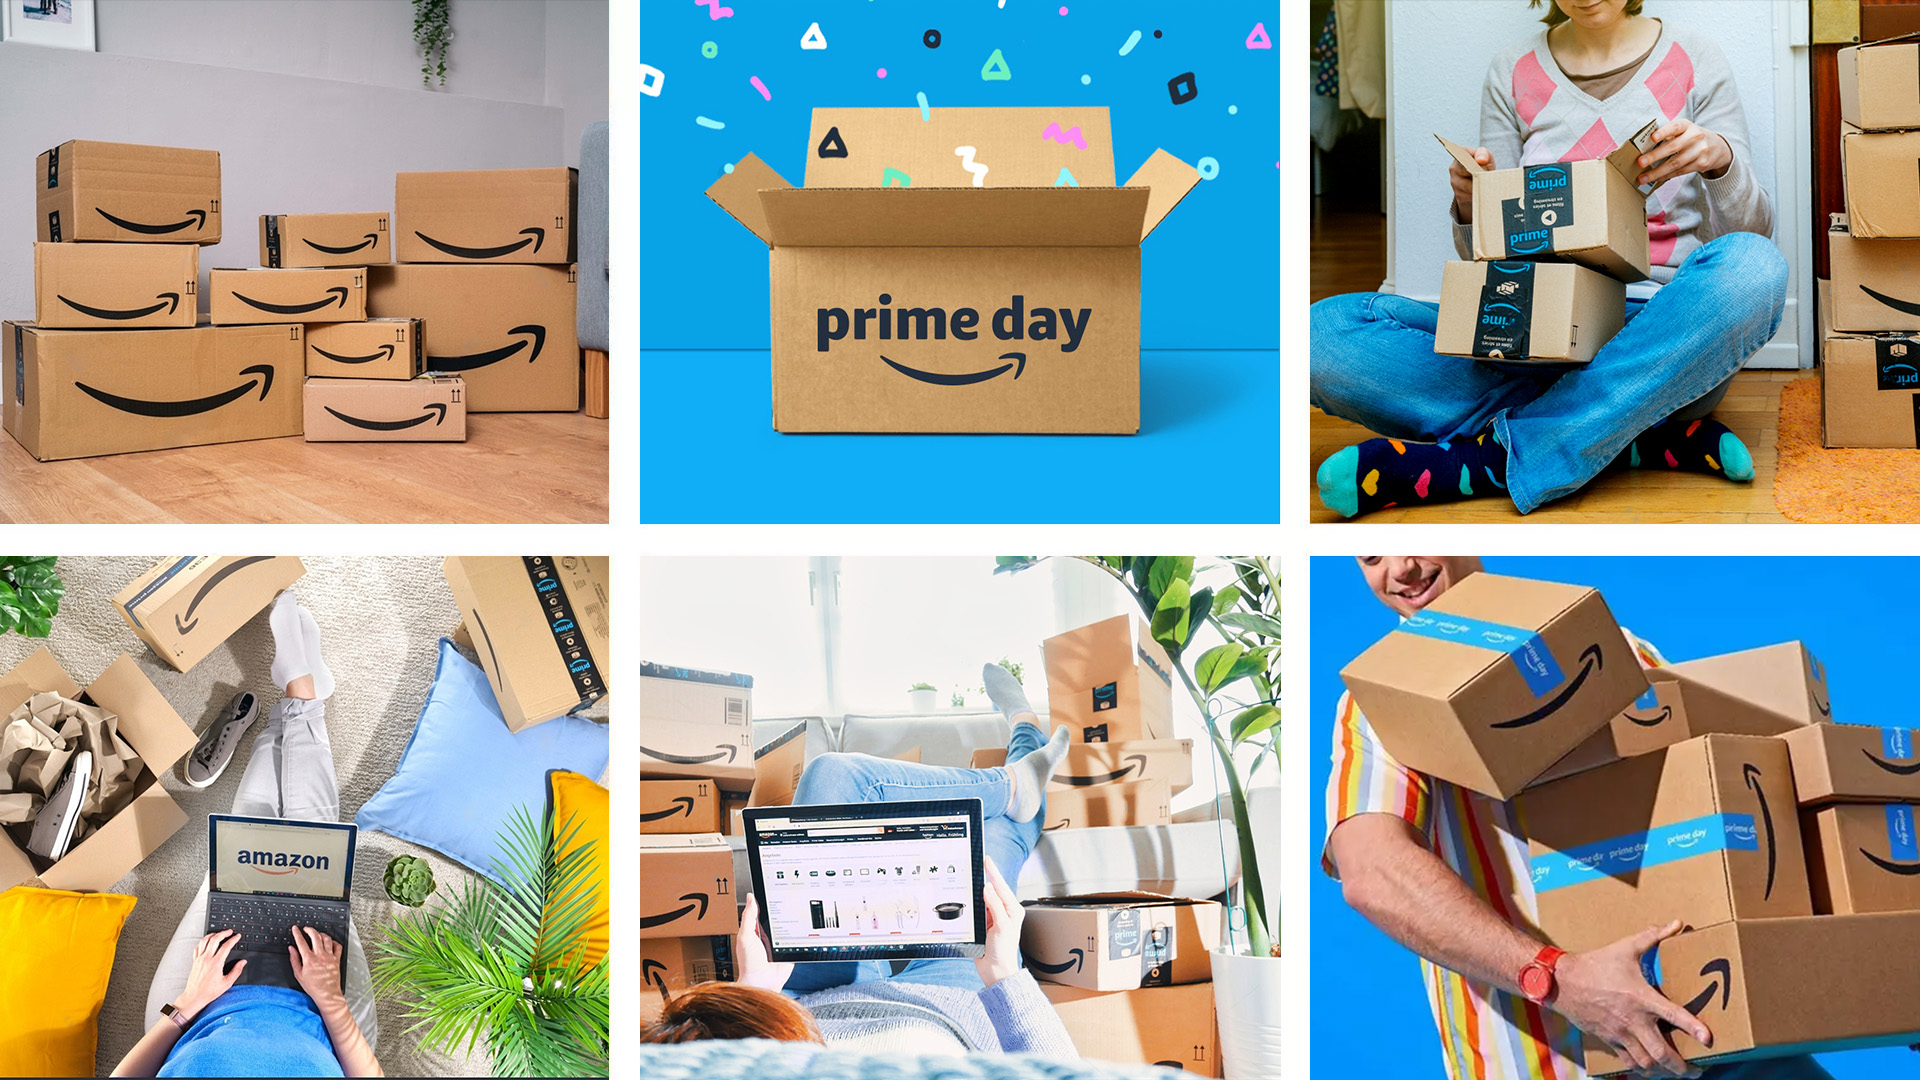 How to increase sales on prime day